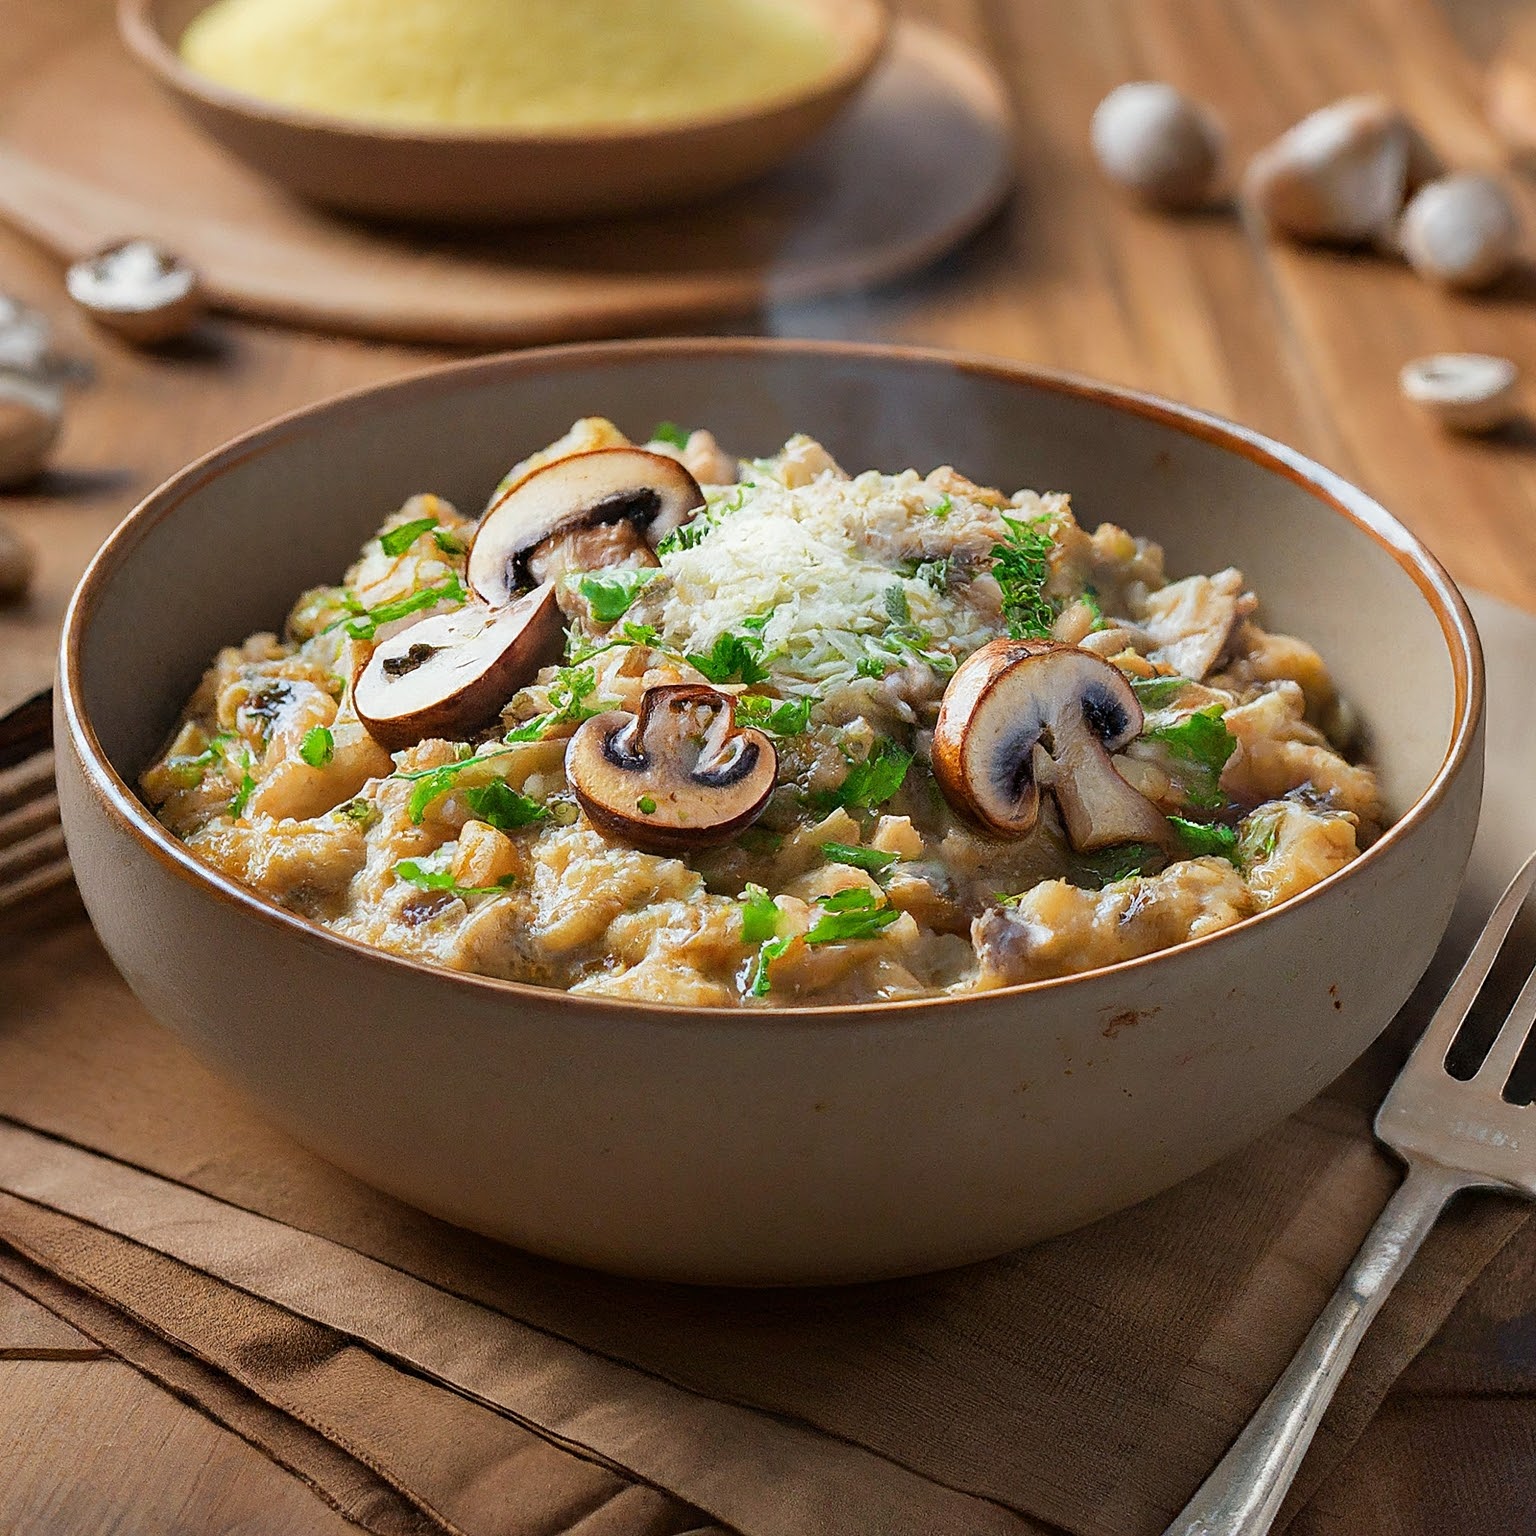 Creamy Millet and Mushroom Risotto in a bowl with sauteed mushrooms, herbs, and parmesan cheese.